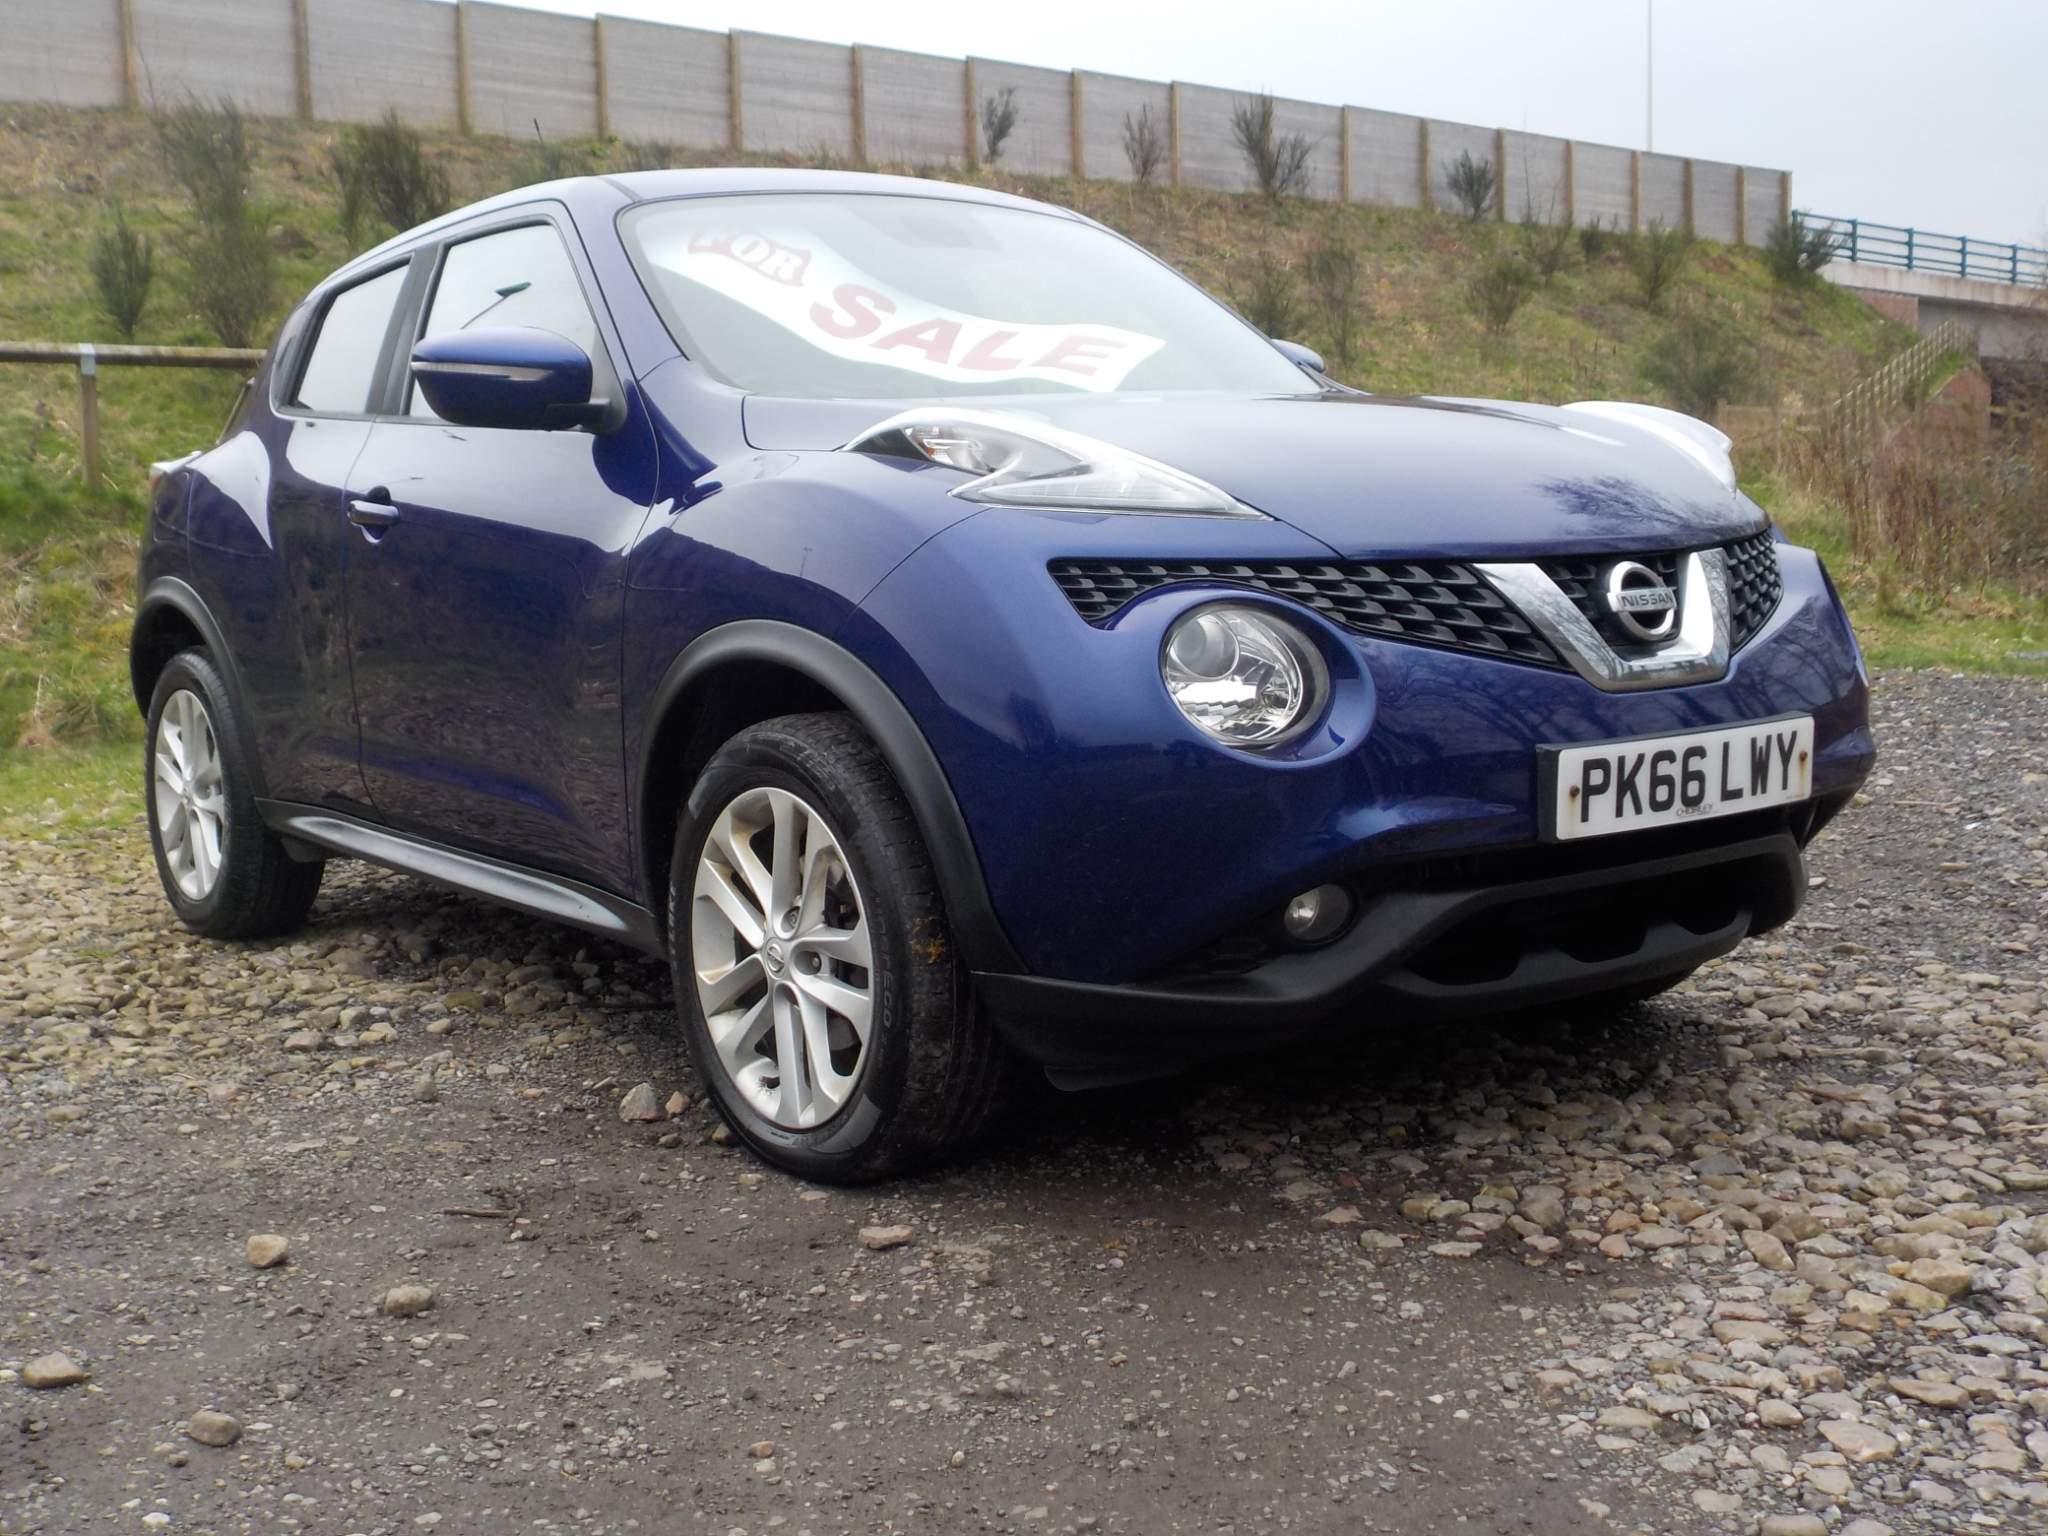 Nissan Juke 1.2 DIG-T N-Connecta Euro 6 (s/s) 5dr